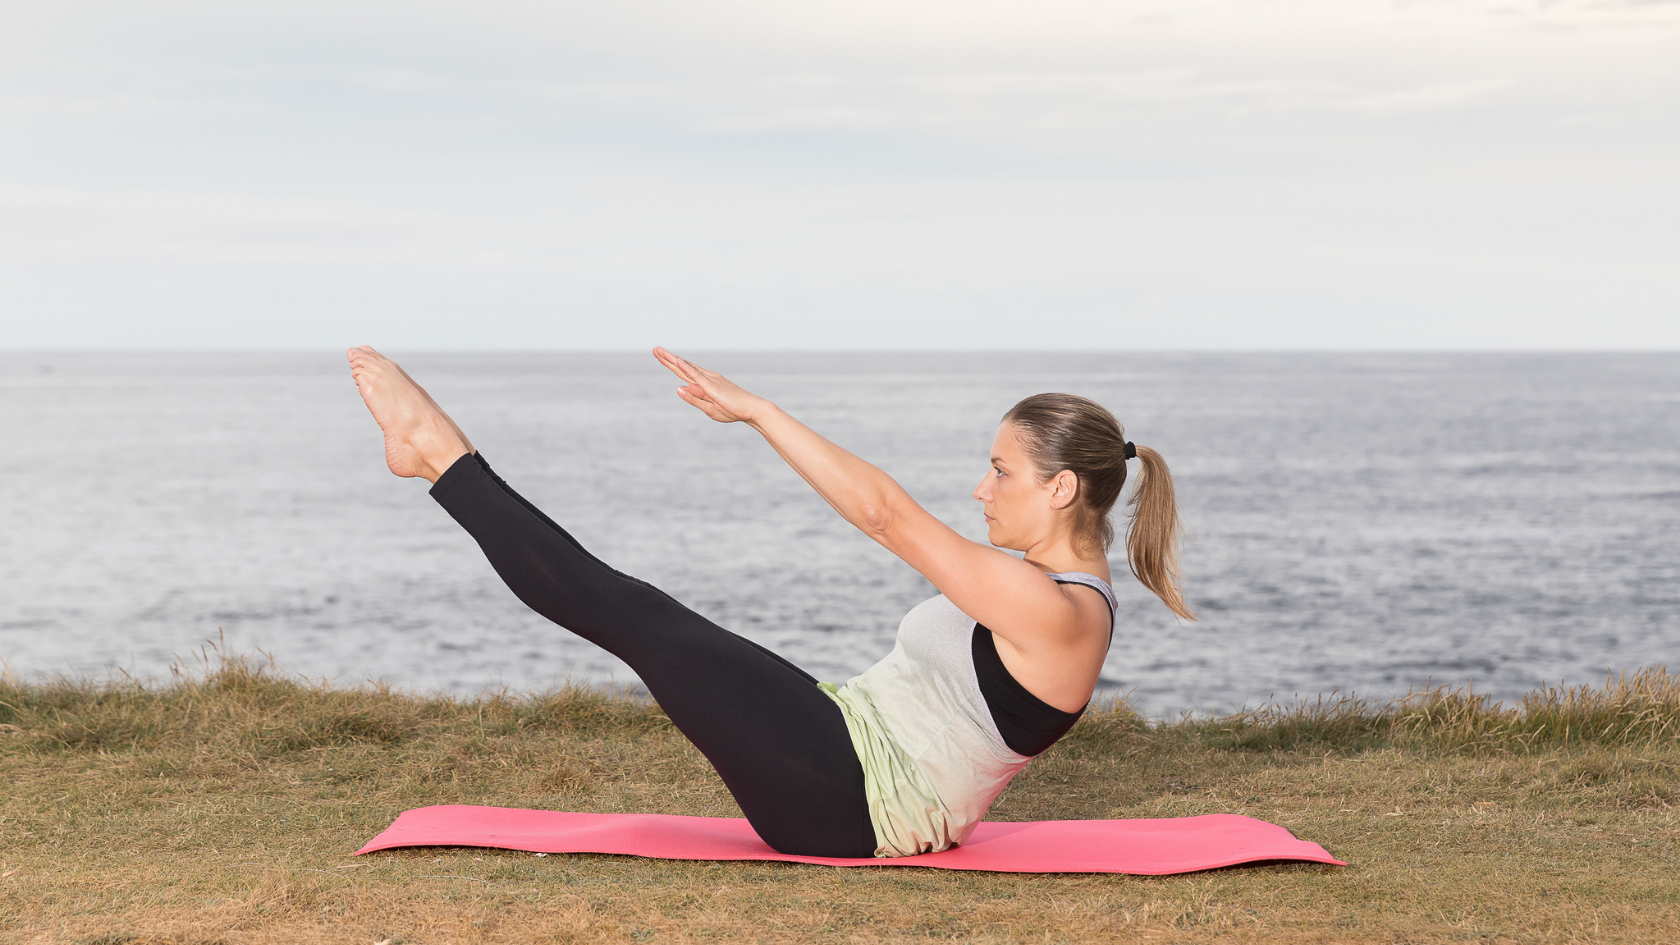 A woman doing yoga on a mat in front of the ocean.